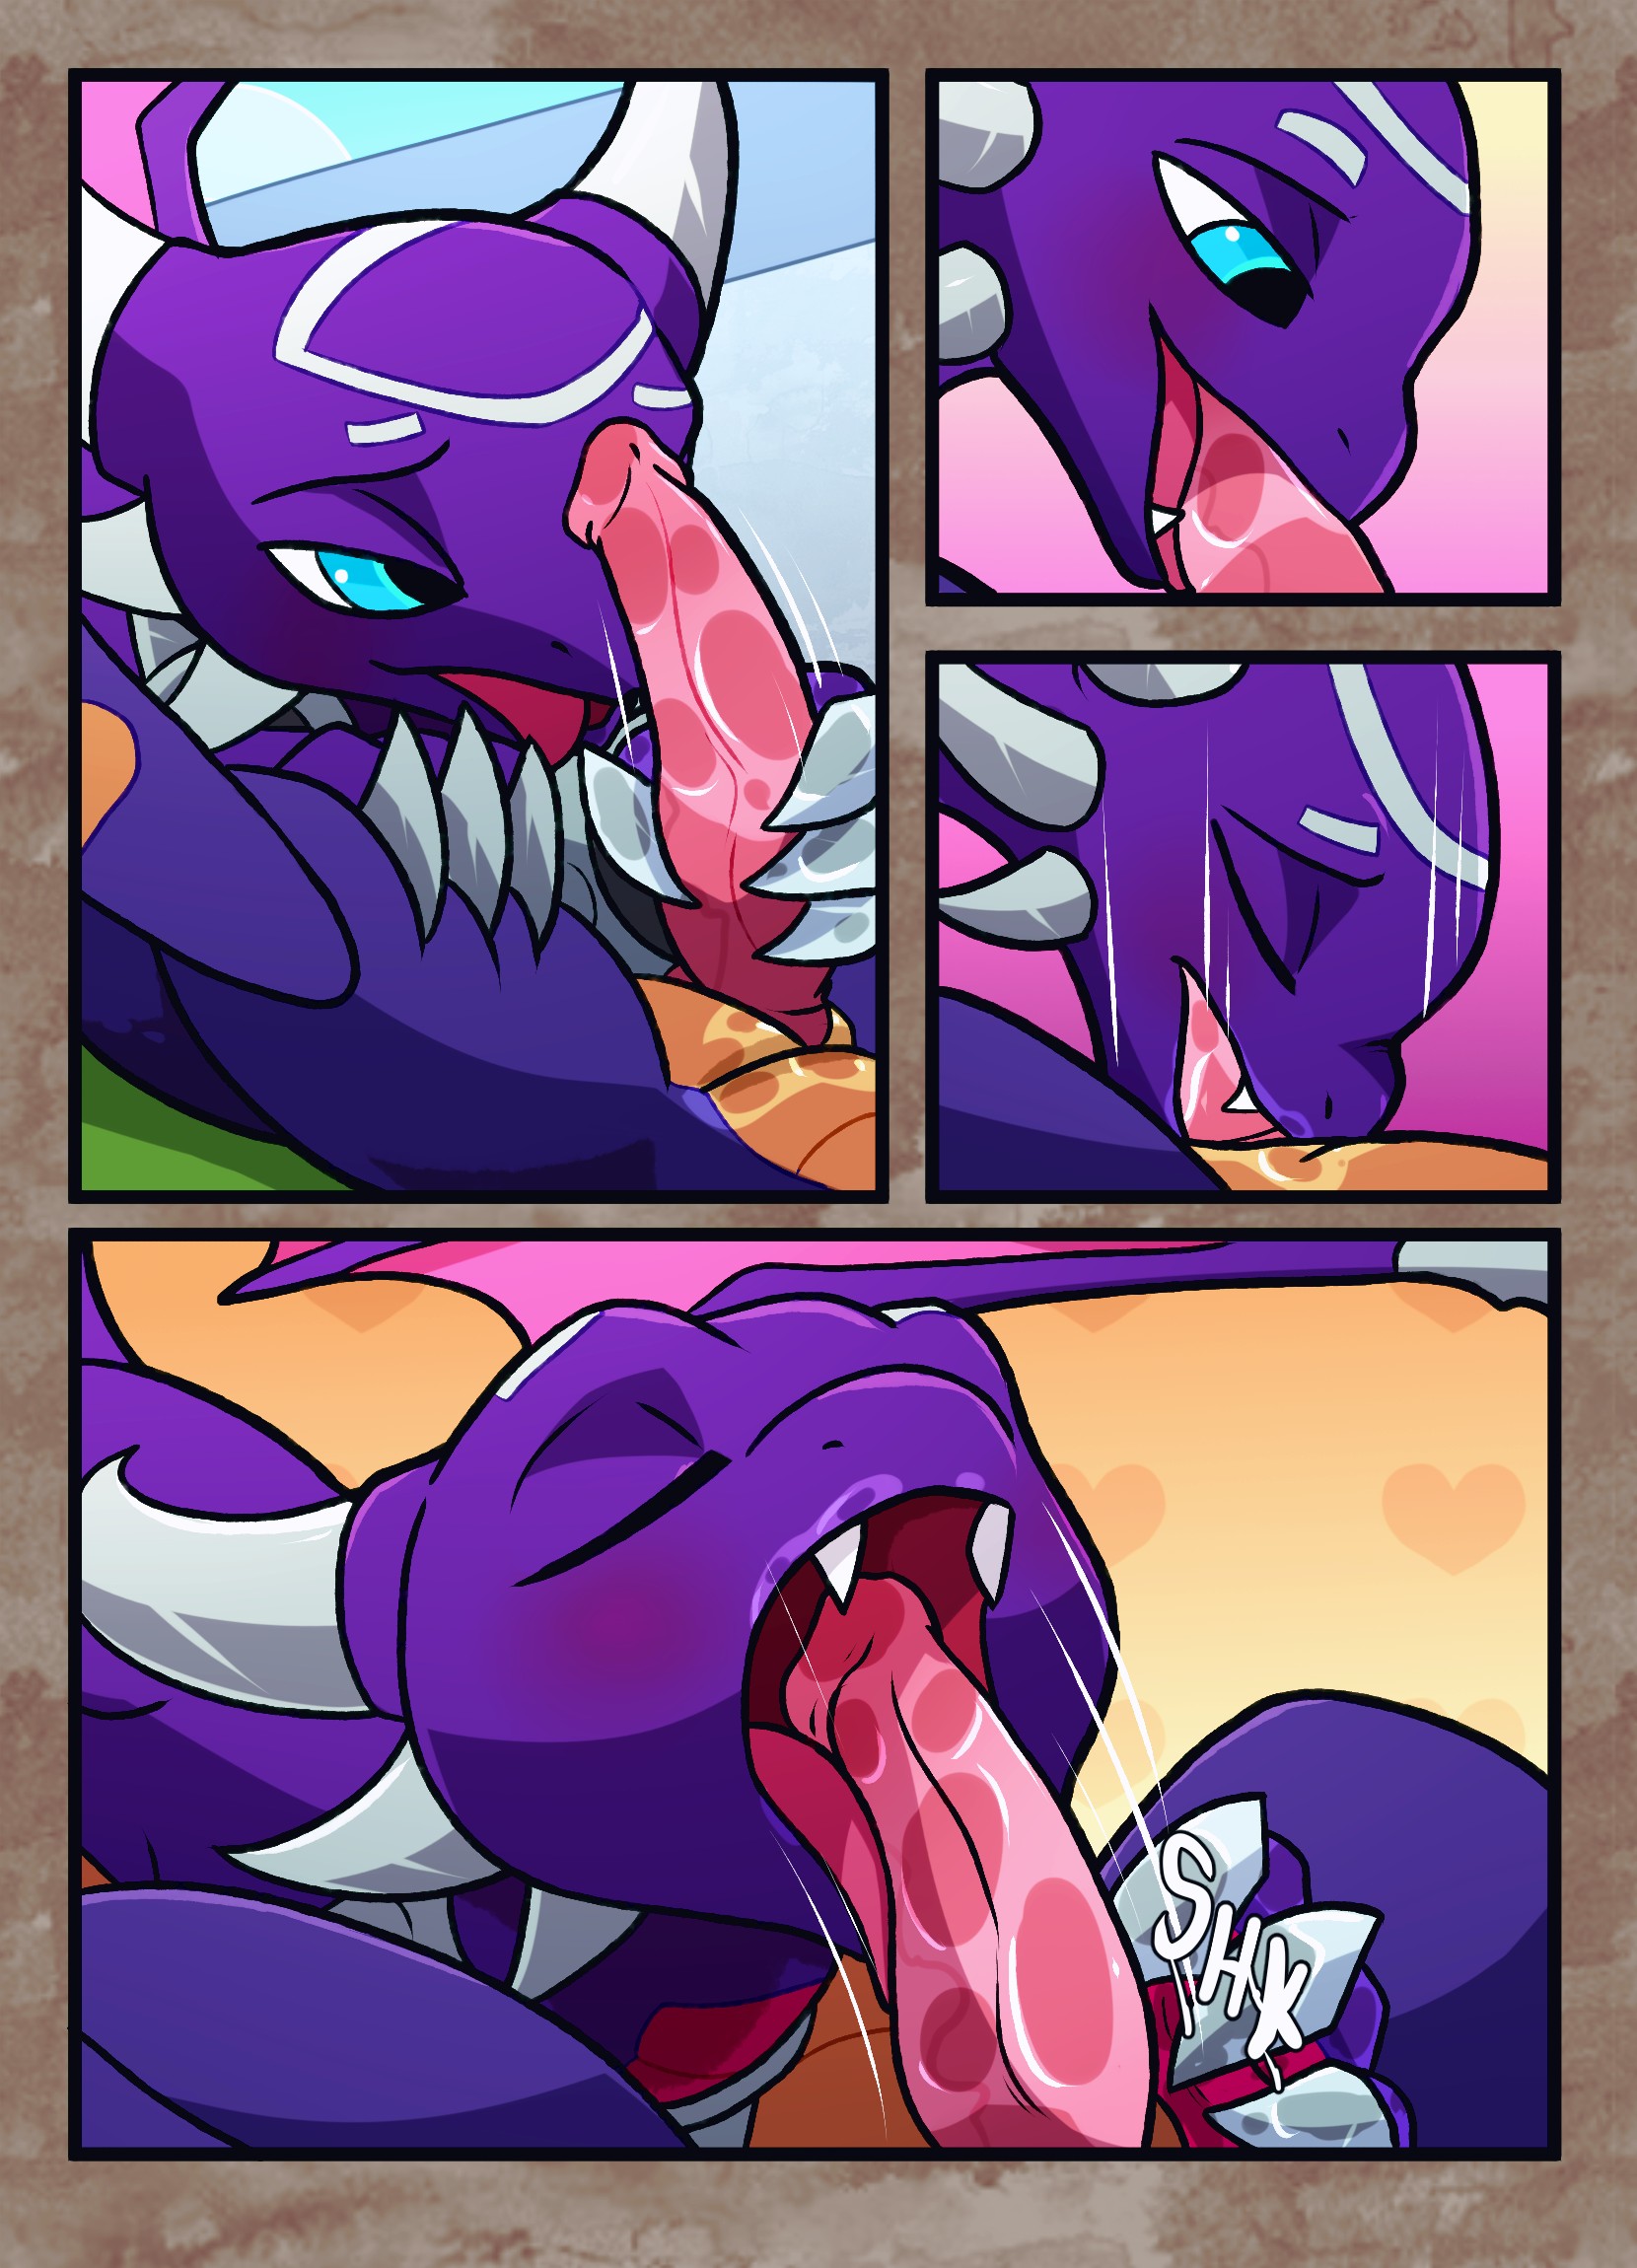 A Friend In Need porn comic page 013